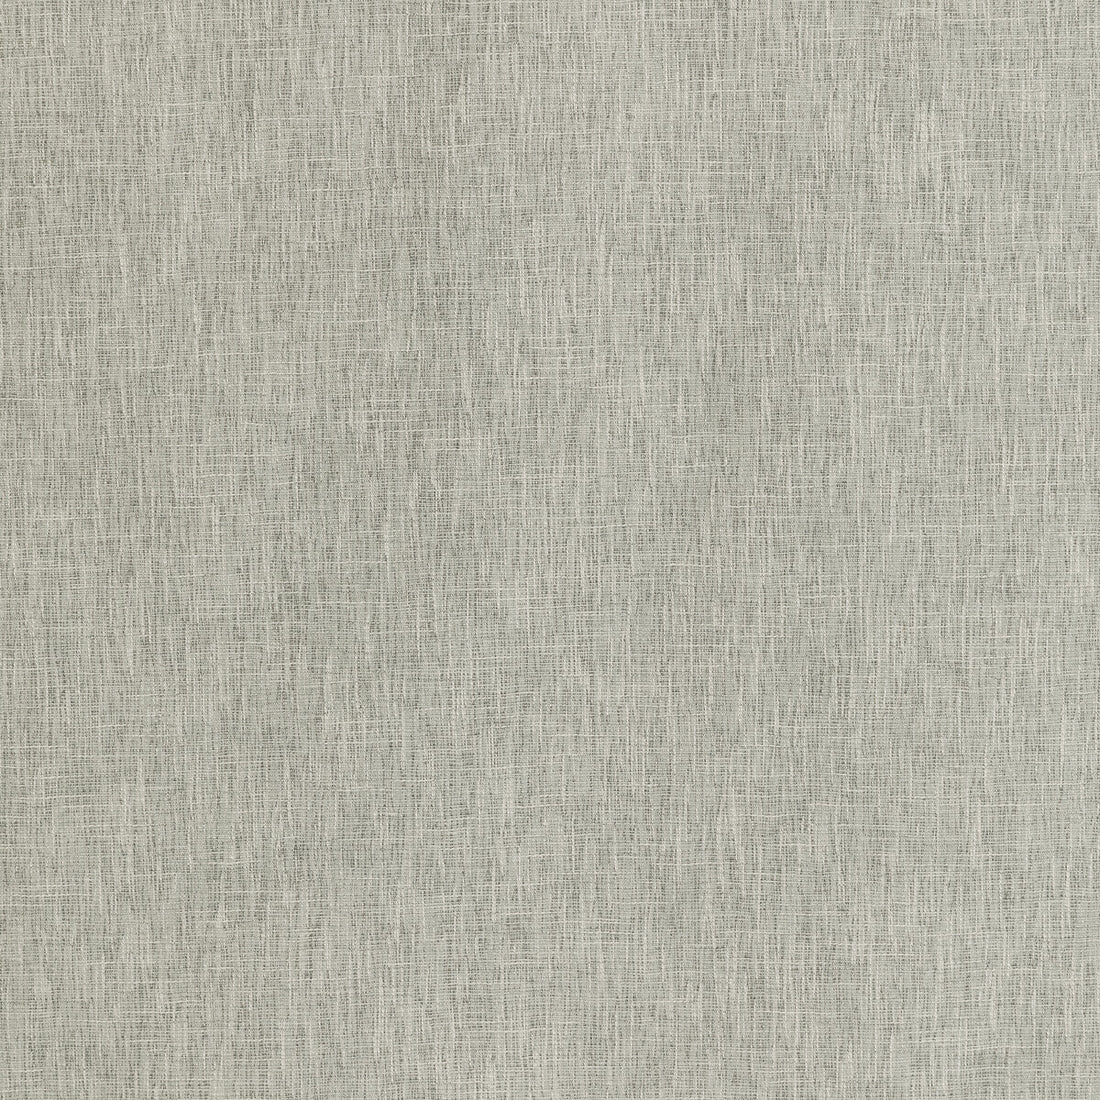 Maris fabric in pewter color - pattern 35923.11.0 - by Kravet Basics in the Monterey collection